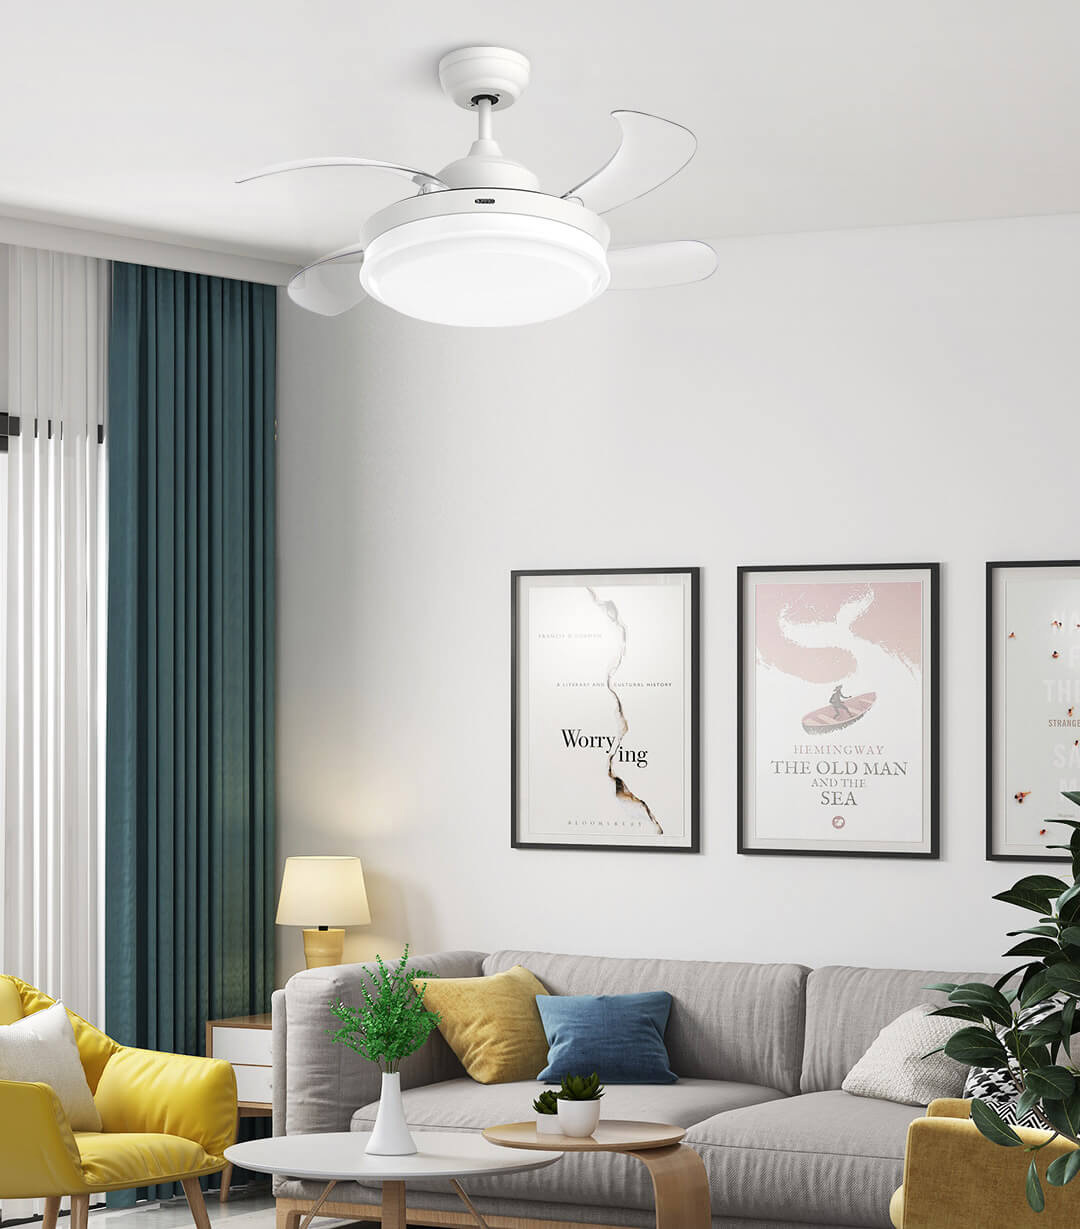 Xiaomi Opple Retractable Ceiling Fan + Light ( Nordic Style )